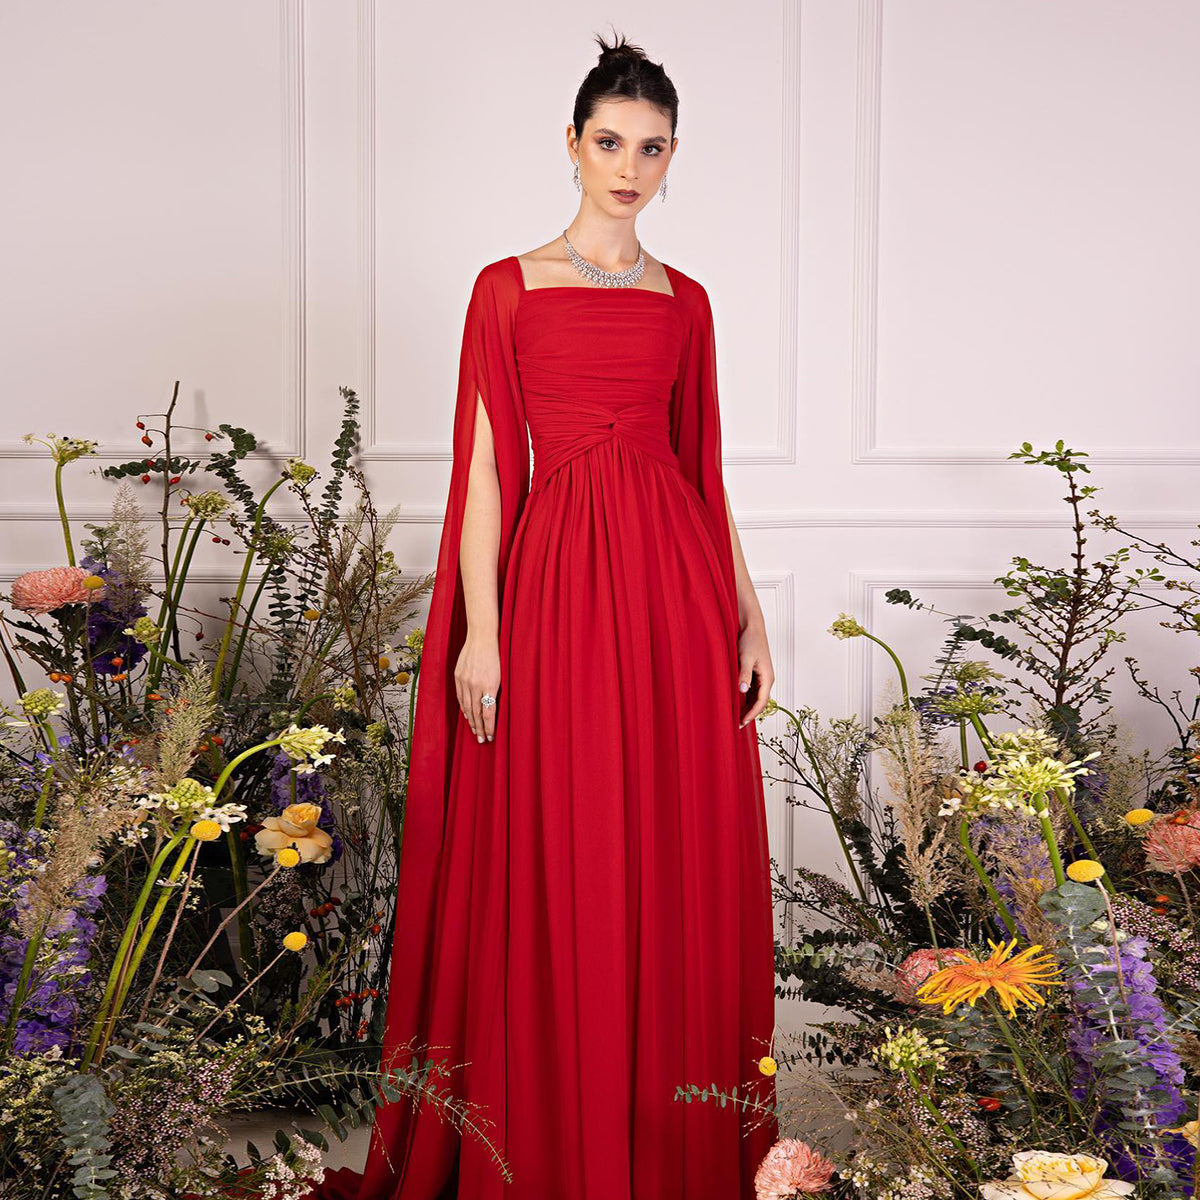 Sharon Said Elegant Red Chiffon Arabic Evening Dresses with Cape Sleeves Square Neckline Wedding Party Gowns SF032